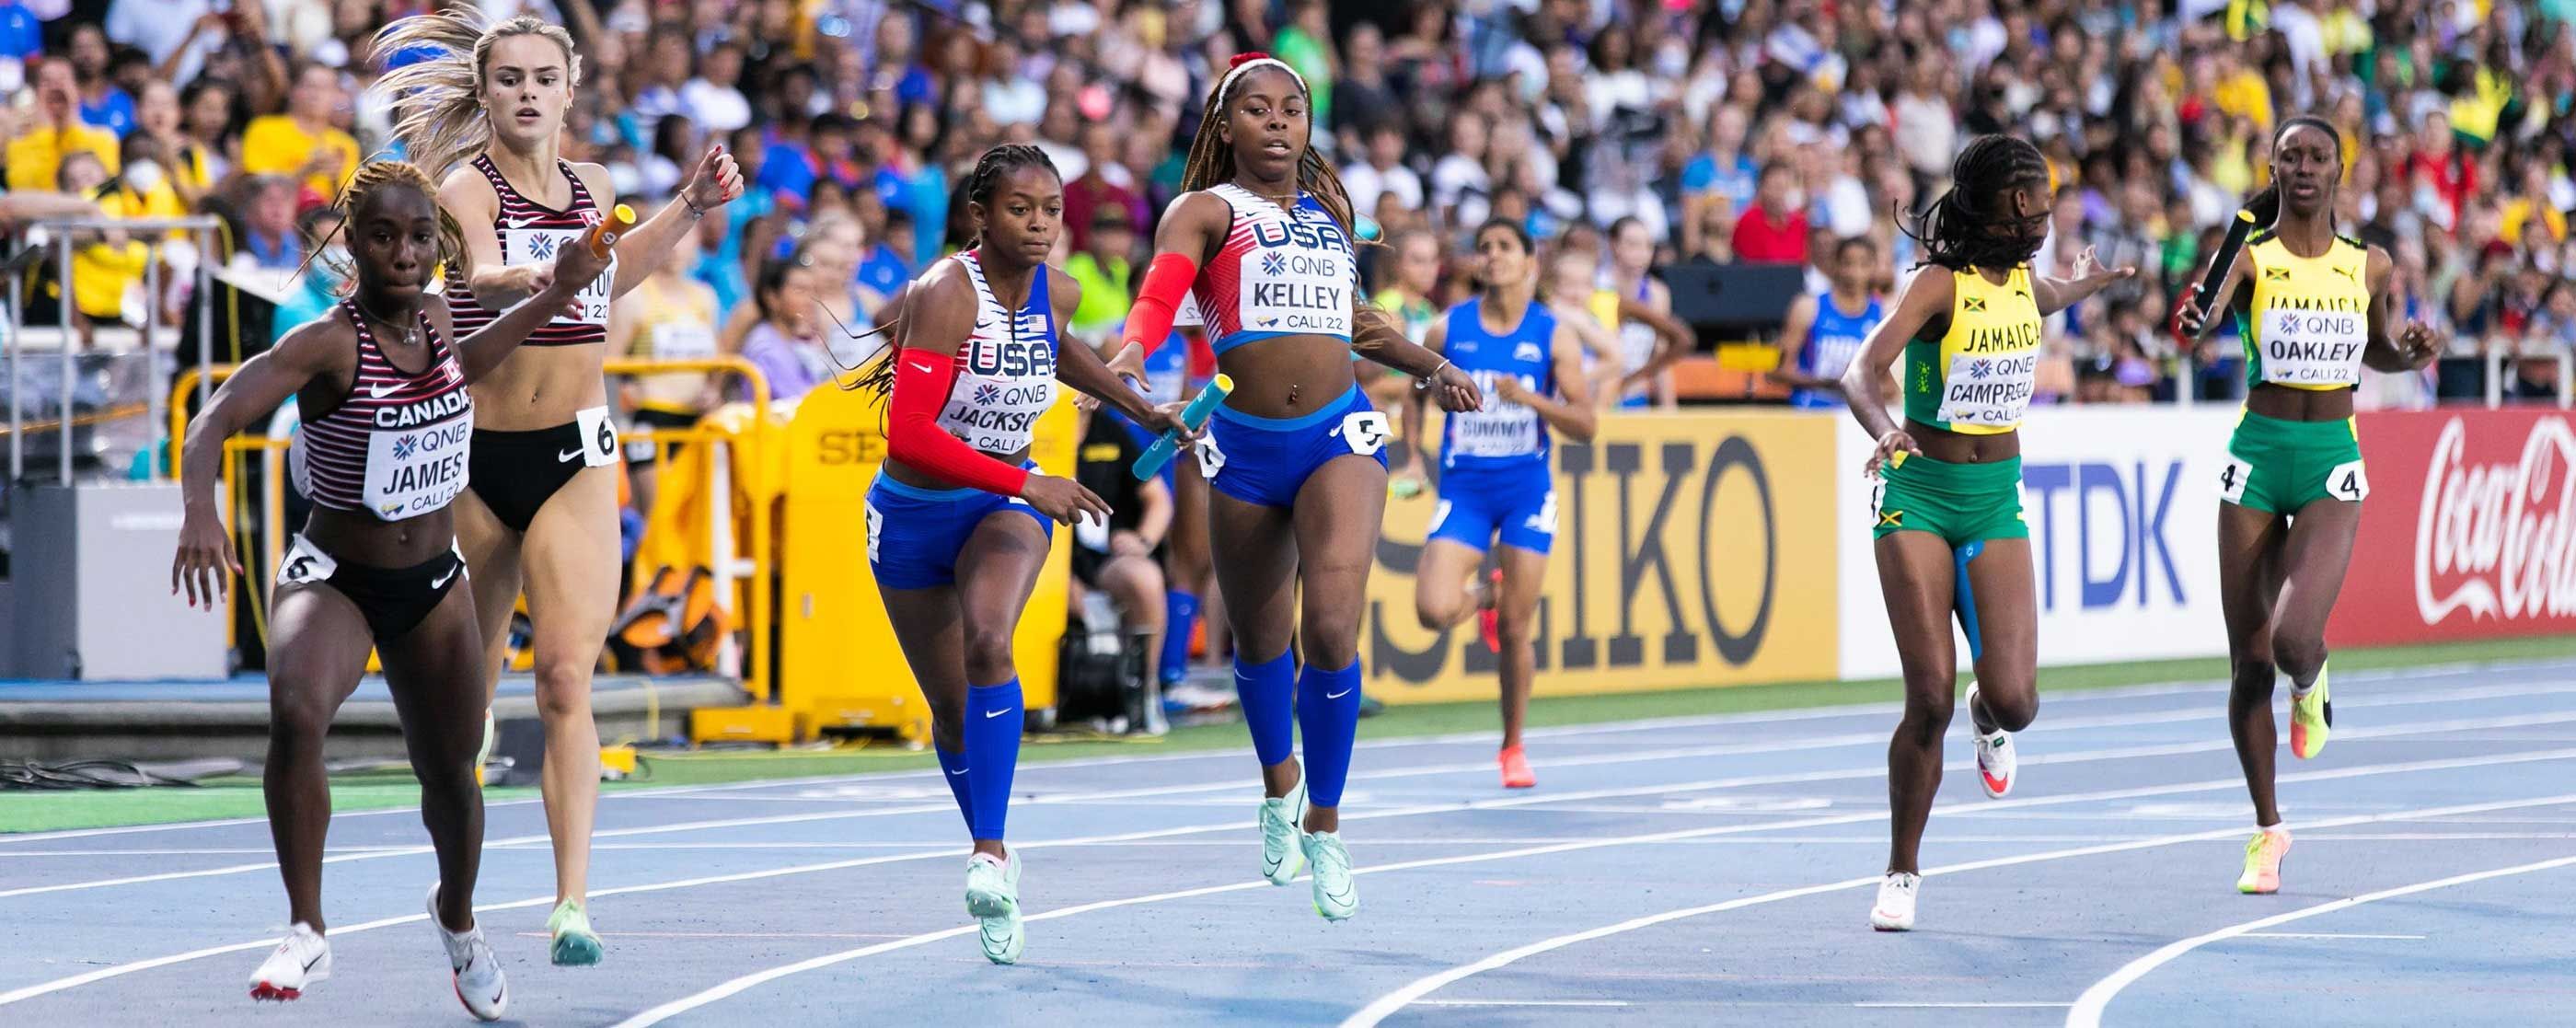 Athletes compete in the women's 4x400m final at the World Athletics U20 Championships in Cali